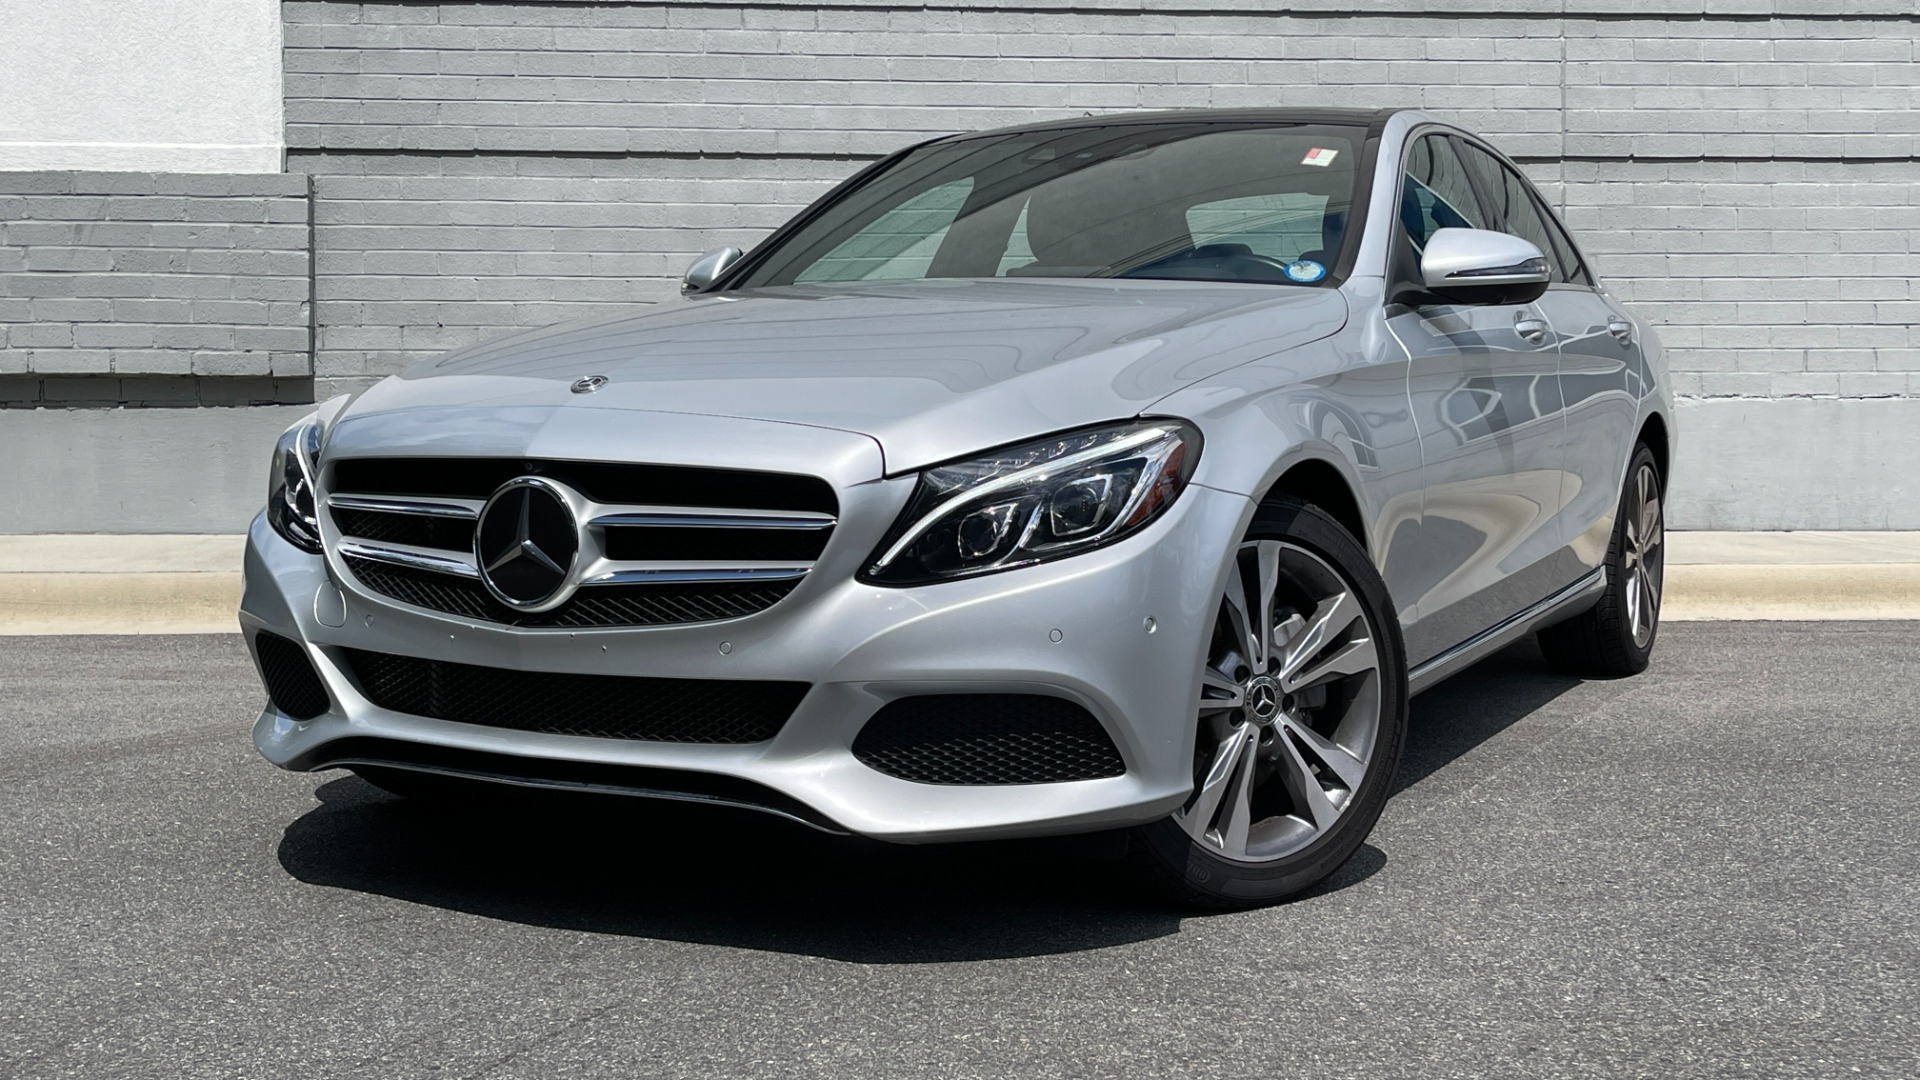 Used 2018 Mercedes-Benz C-Class C300 / PANORAMIC / HEADS UP DISPLAY / ADVANCED LIGHTING / PREMIUM ASSISTANC for sale $32,995 at Formula Imports in Charlotte NC 28227 1